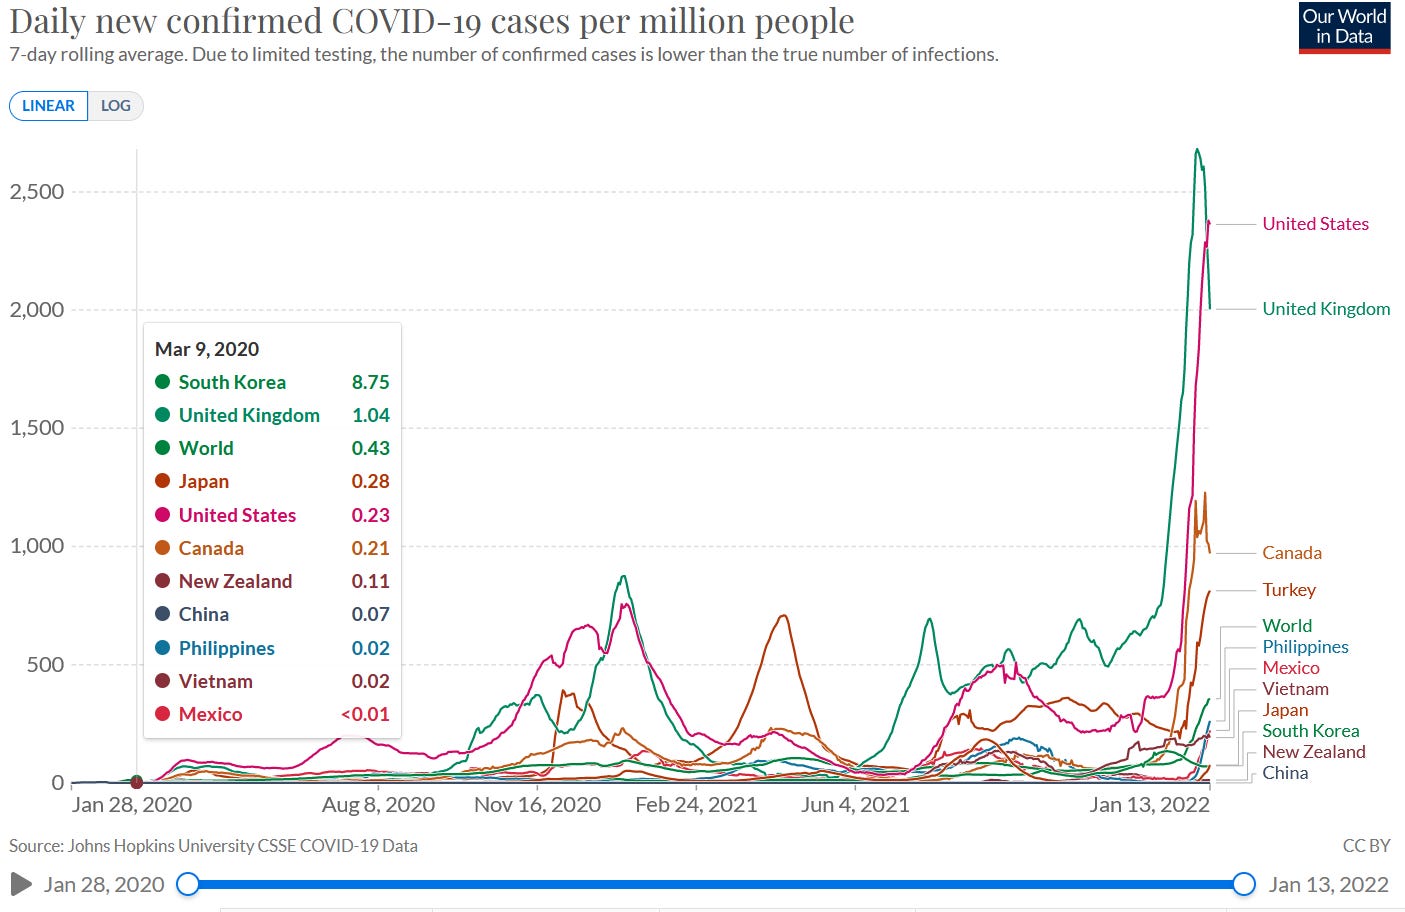 Daily new confirmed COVID-19 cases per million people in selected countries